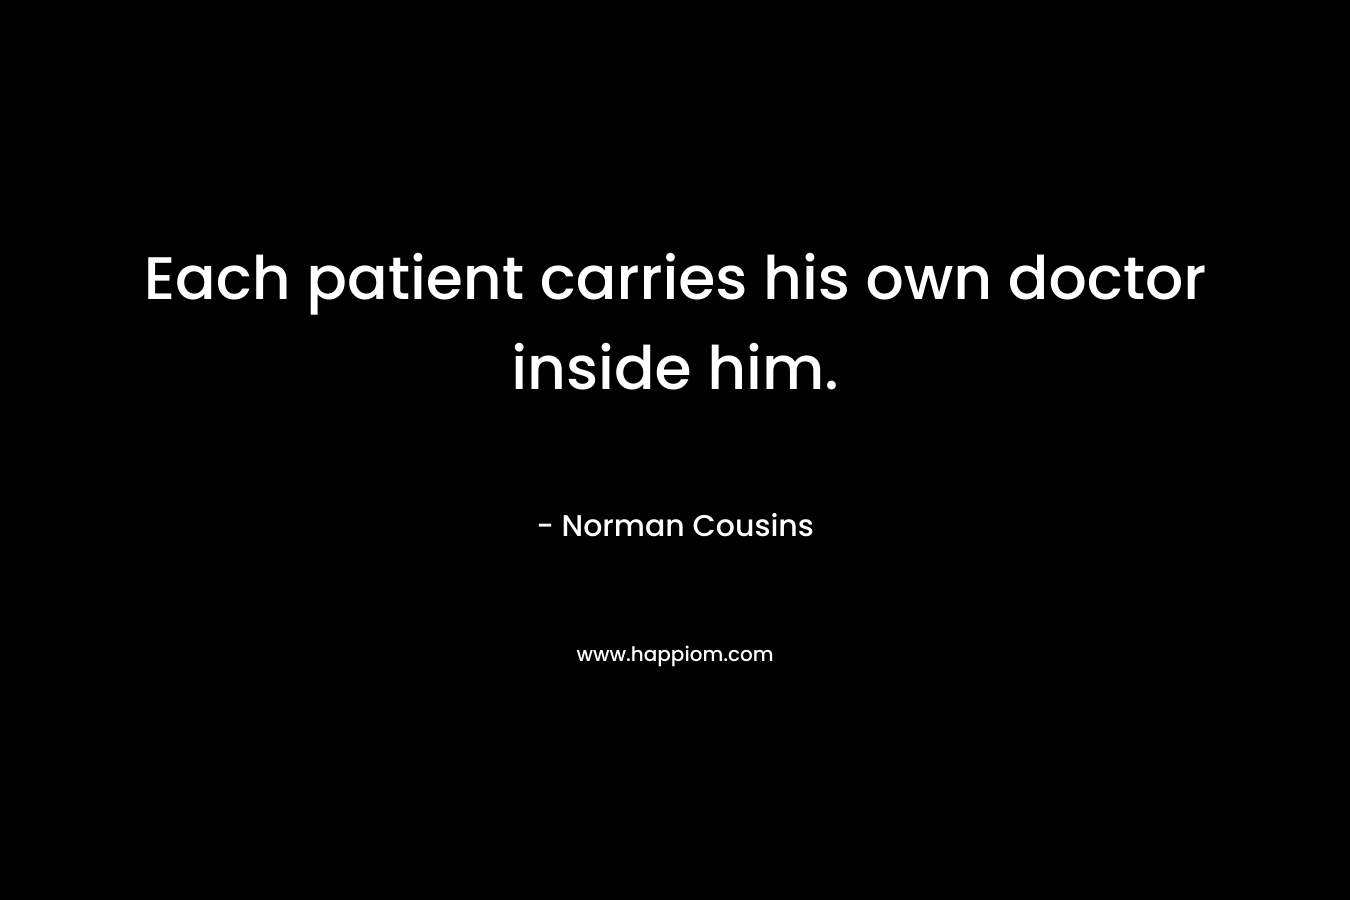 Each patient carries his own doctor inside him. – Norman Cousins